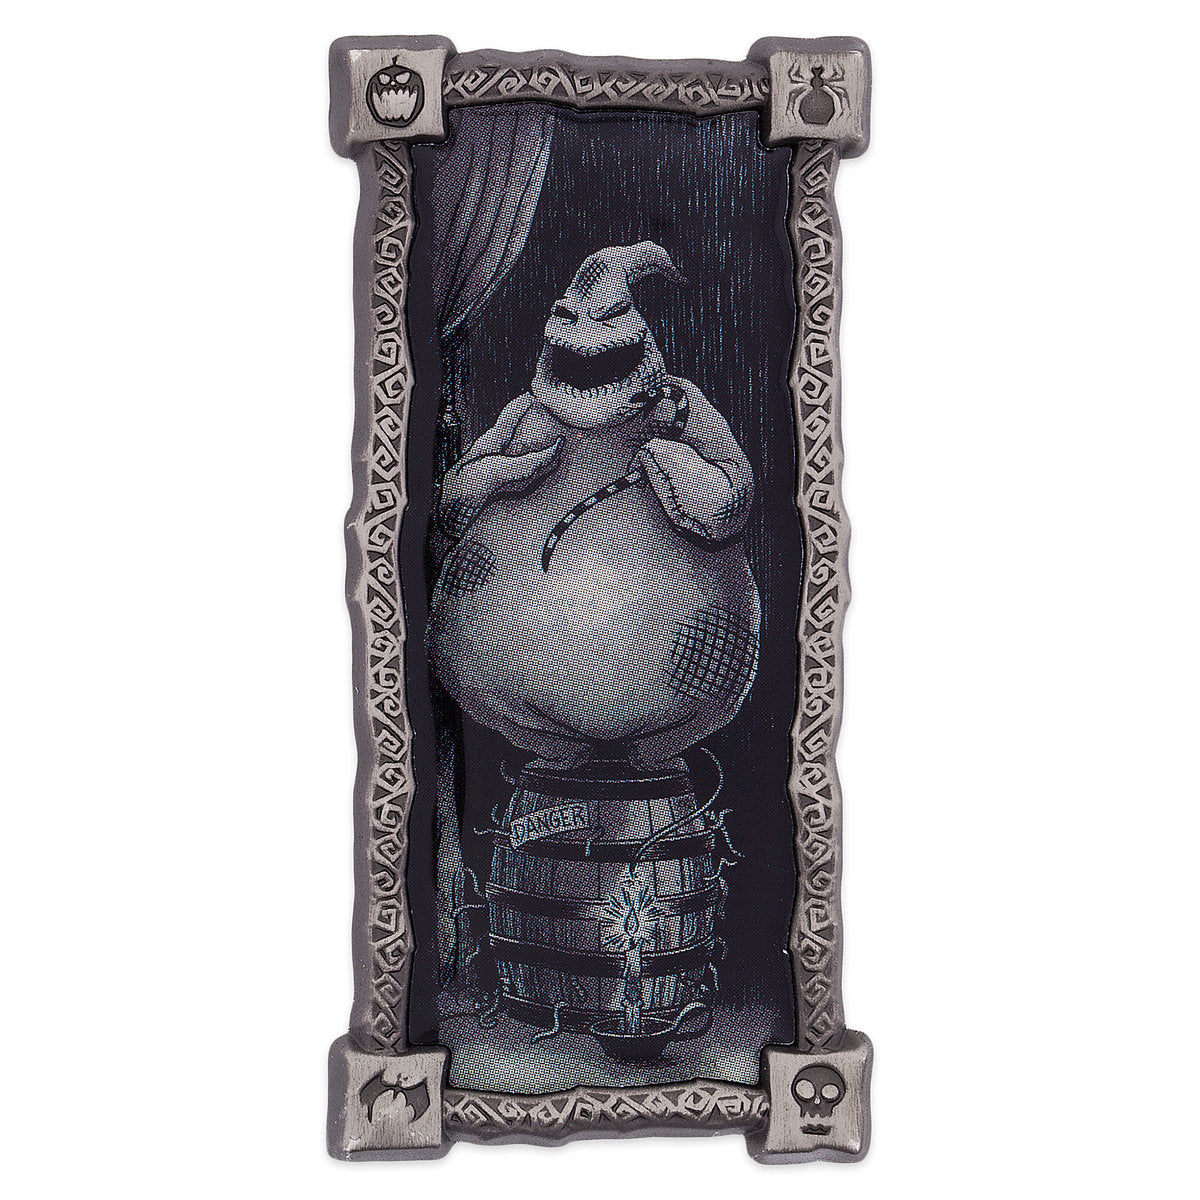 Disney Oogie Boogie Haunted Mansion Portrait Pin Nightmare Before Christmas New